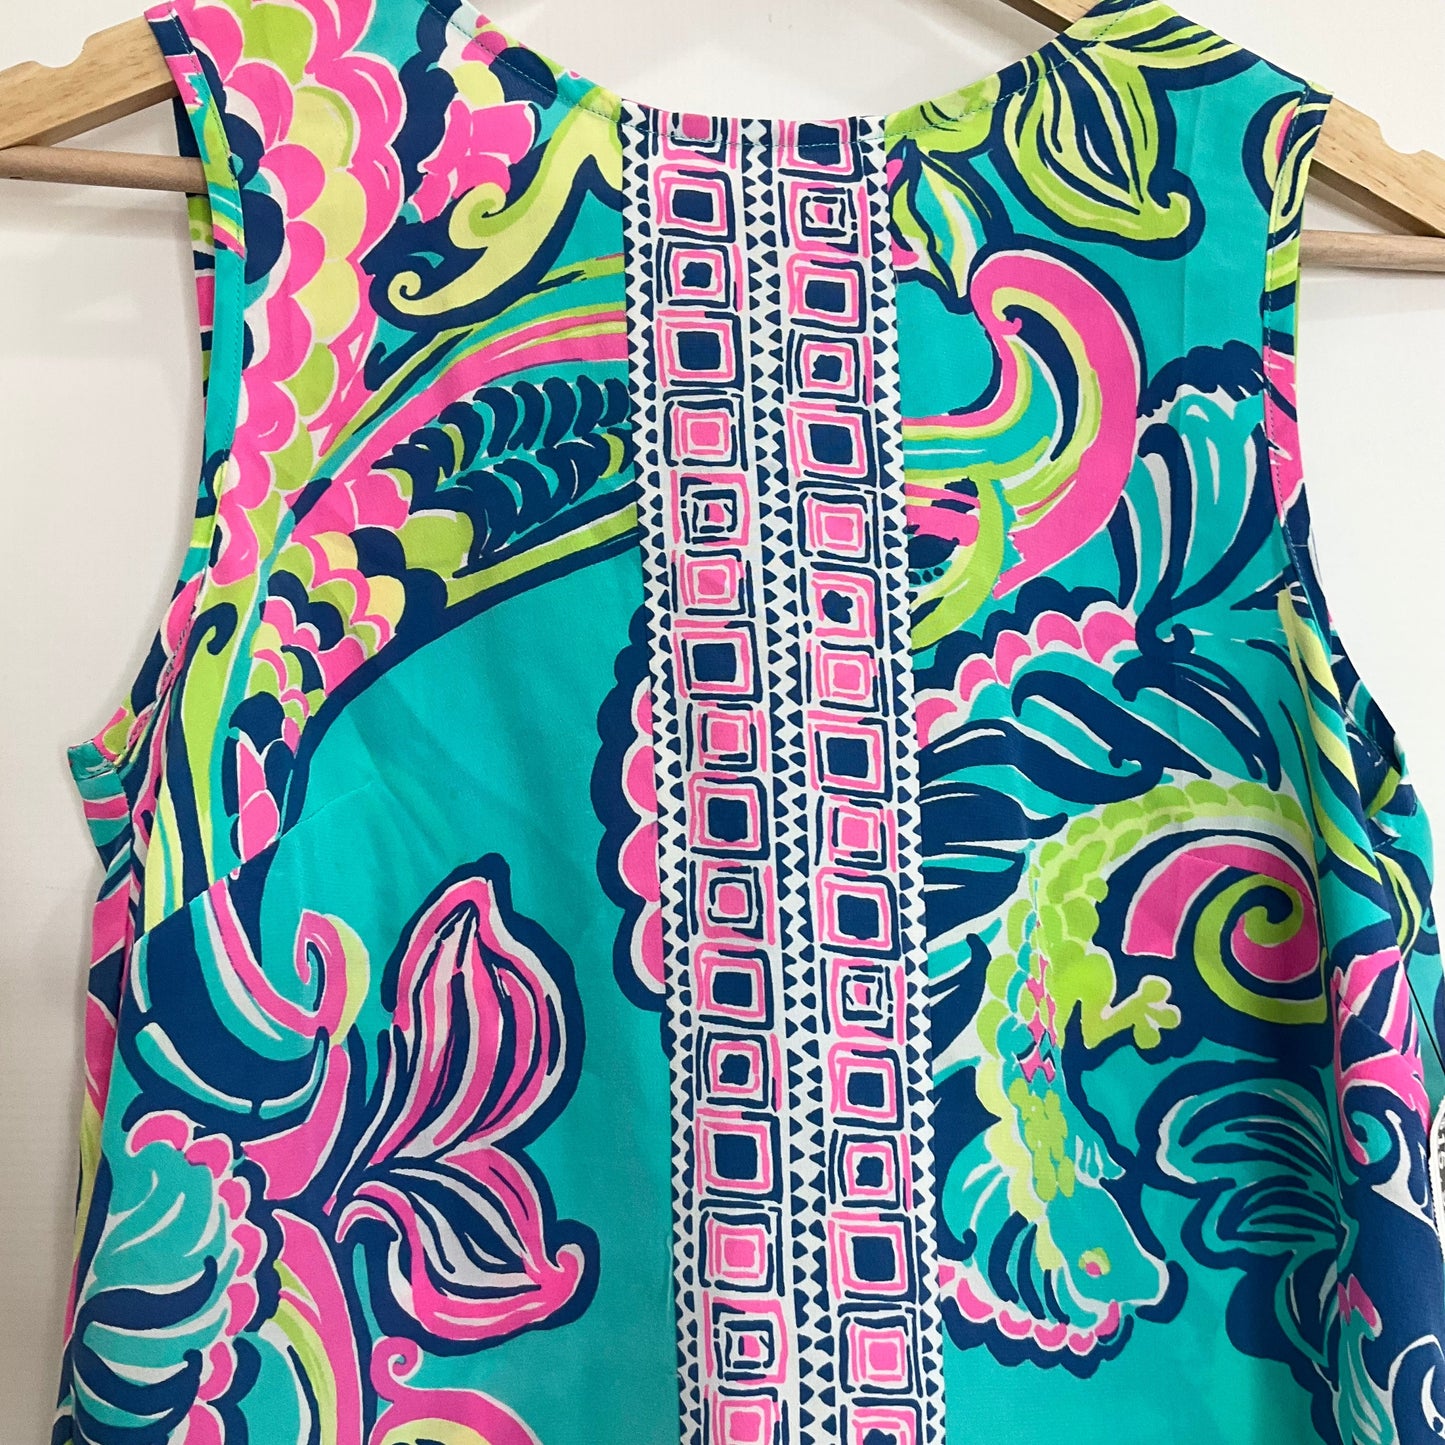 Multi-colored Top Sleeveless Lilly Pulitzer, Size Xs